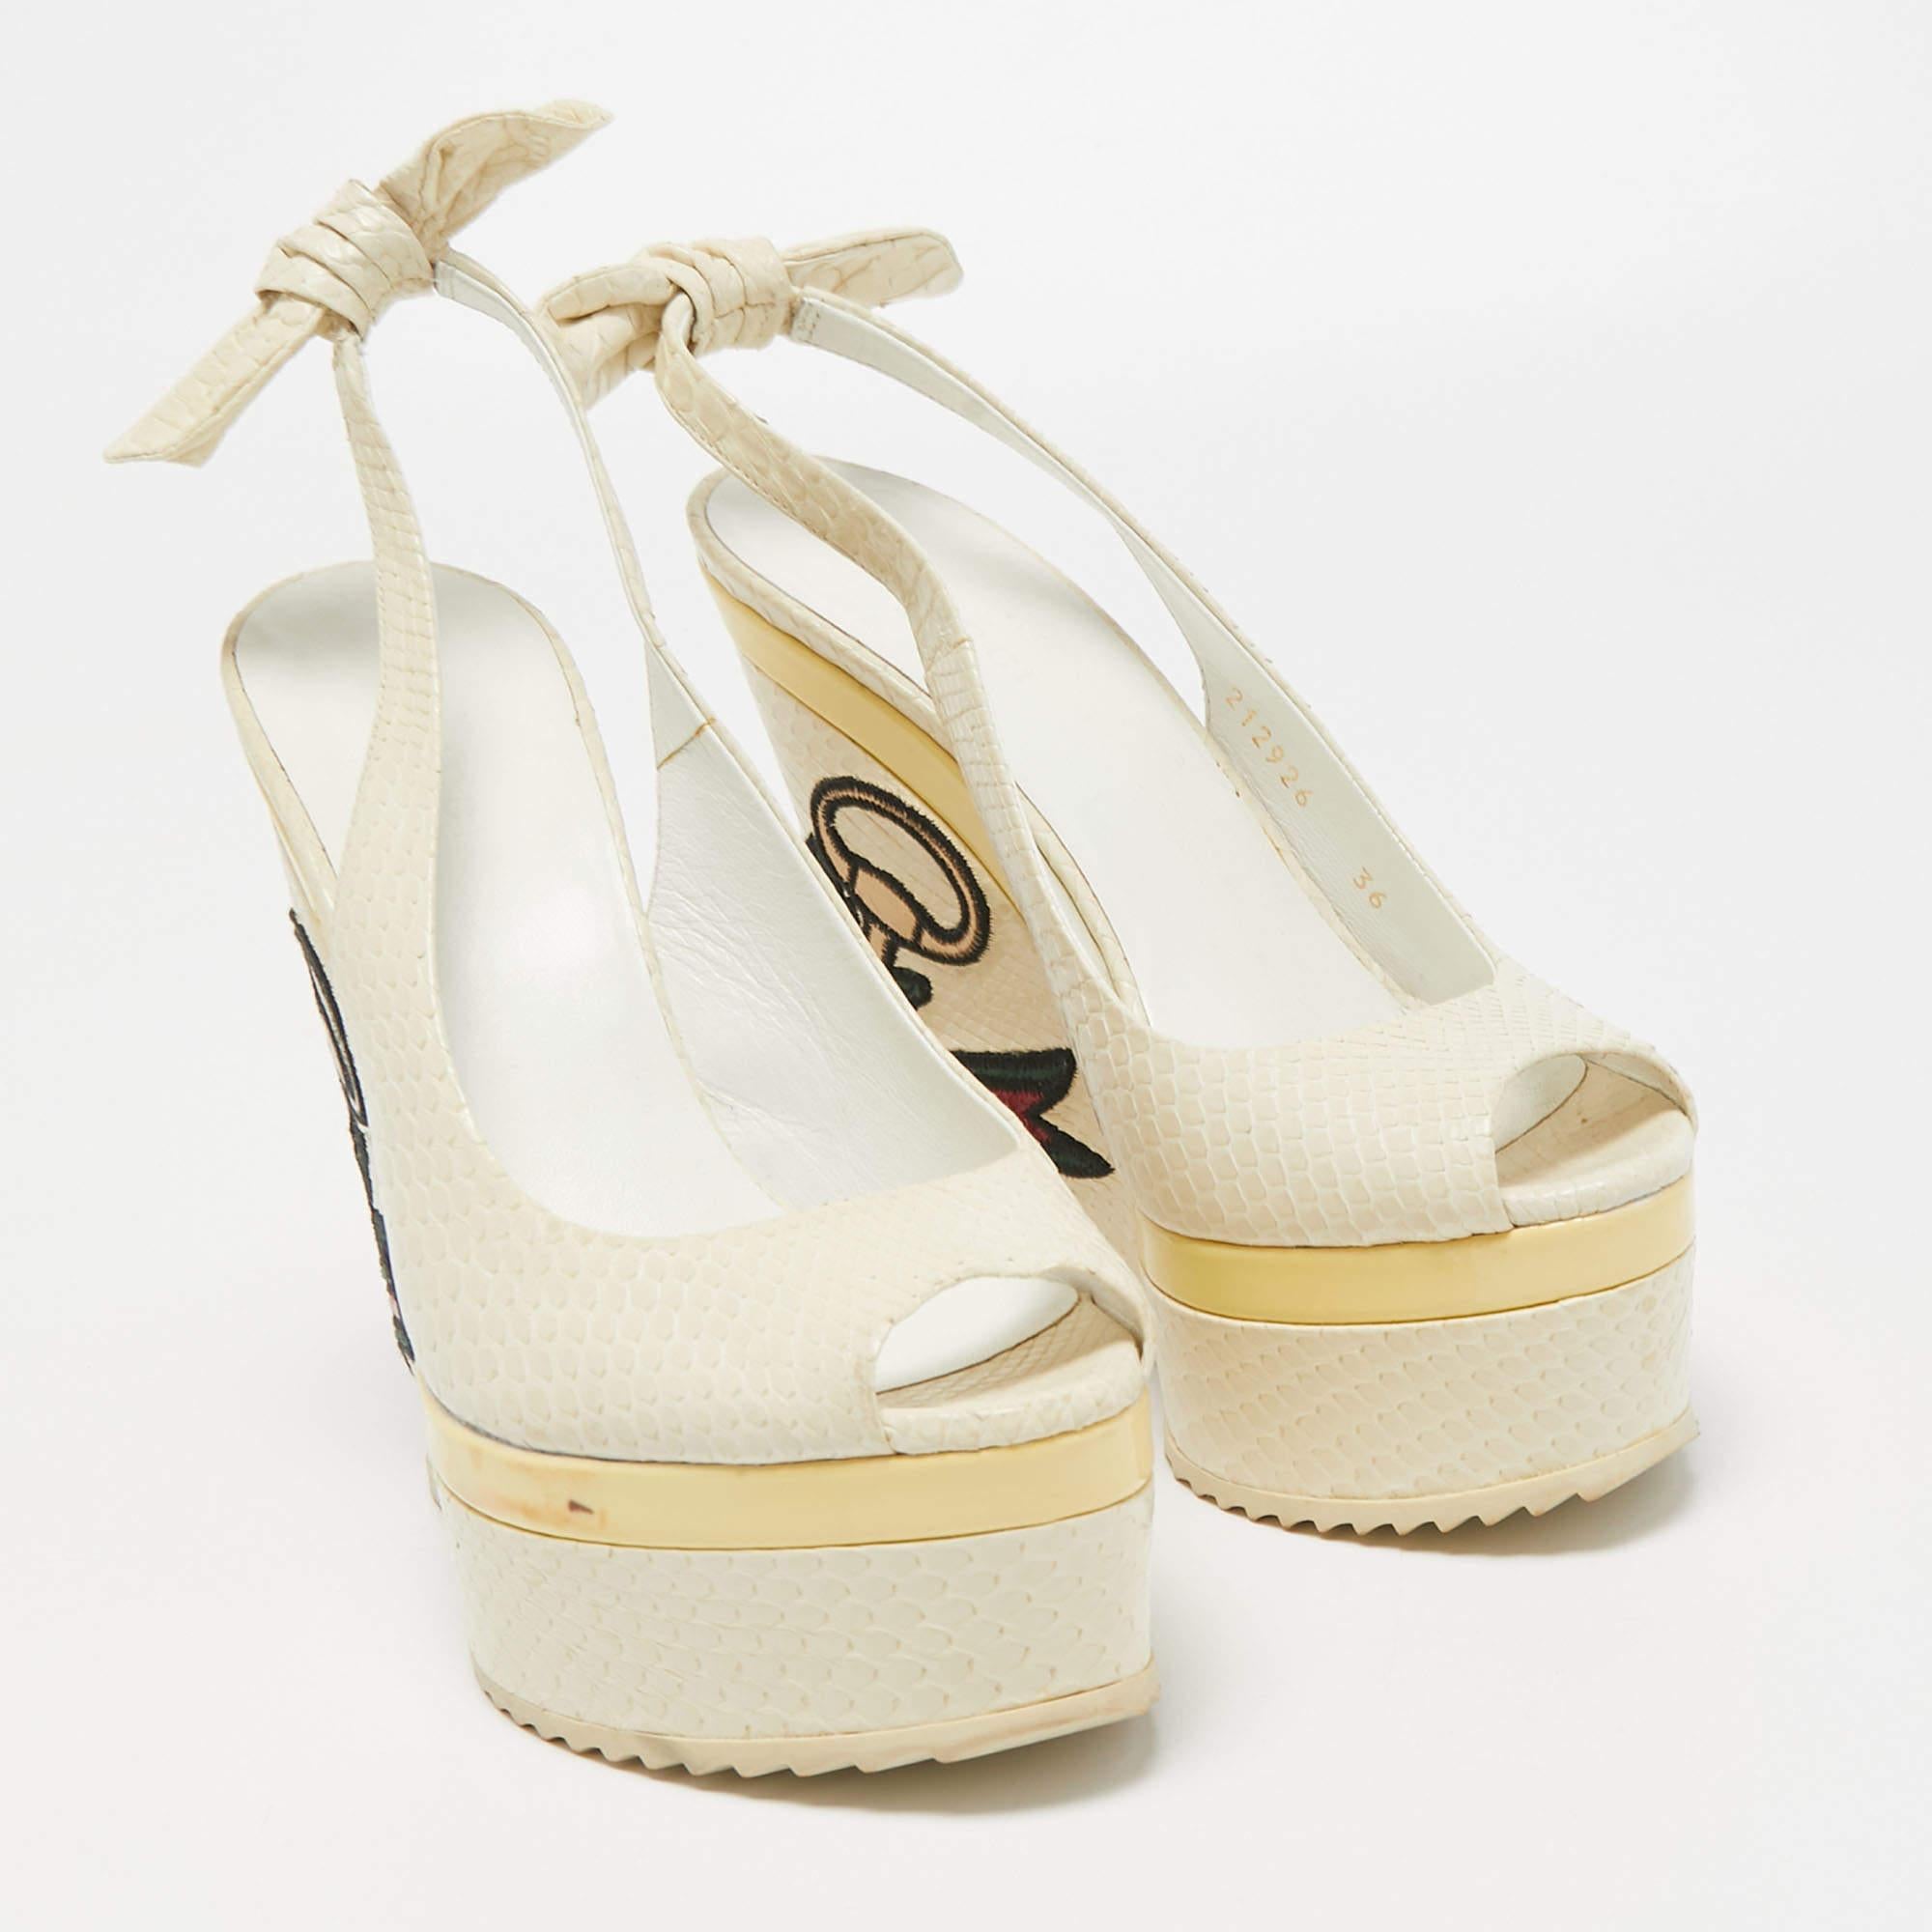 Perfectly sewn and finished to ensure an elegant look and fit, these Gucci wedge shoes are a purchase you'll love flaunting. They look great on the feet.

